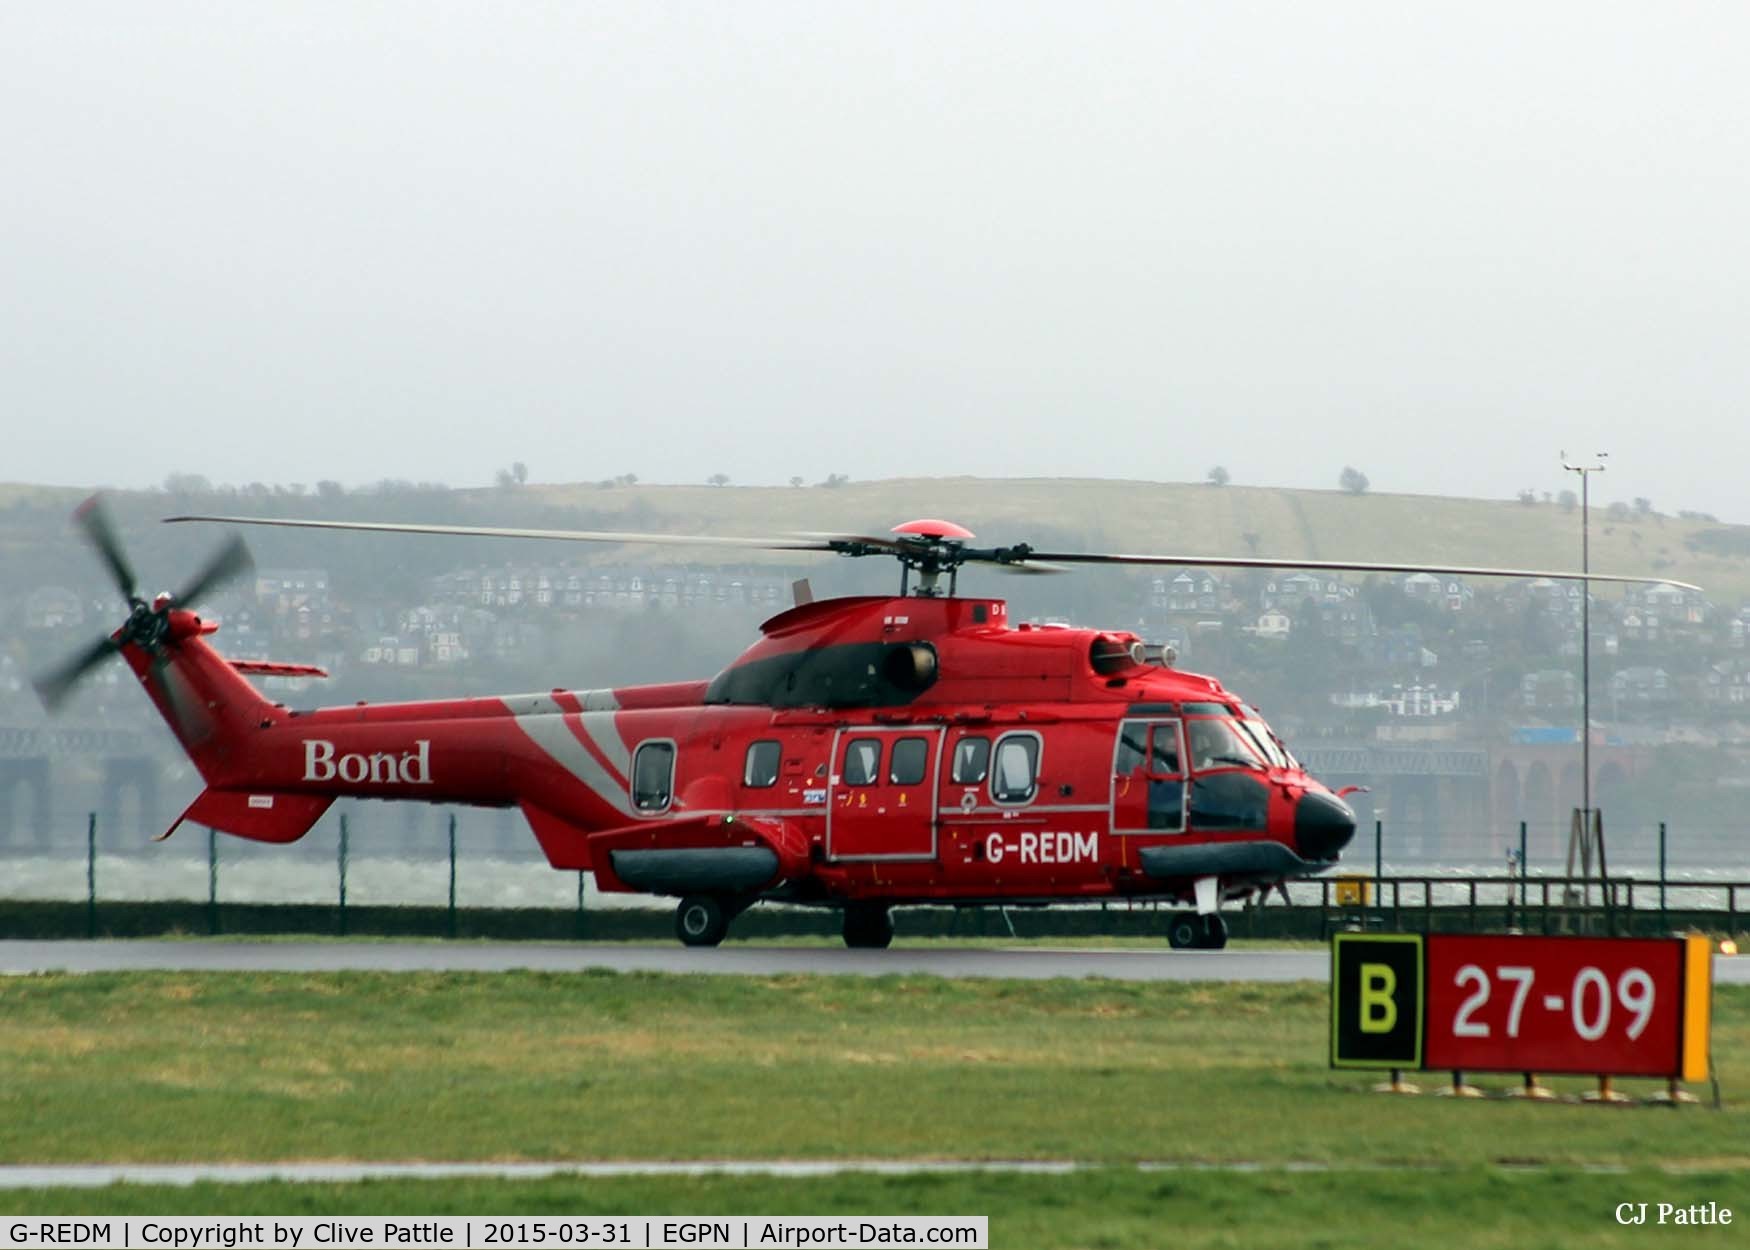 G-REDM, 2004 Eurocopter AS-332L-2 Super Puma C/N 2614, Pictured at Dundee Riverside crew training